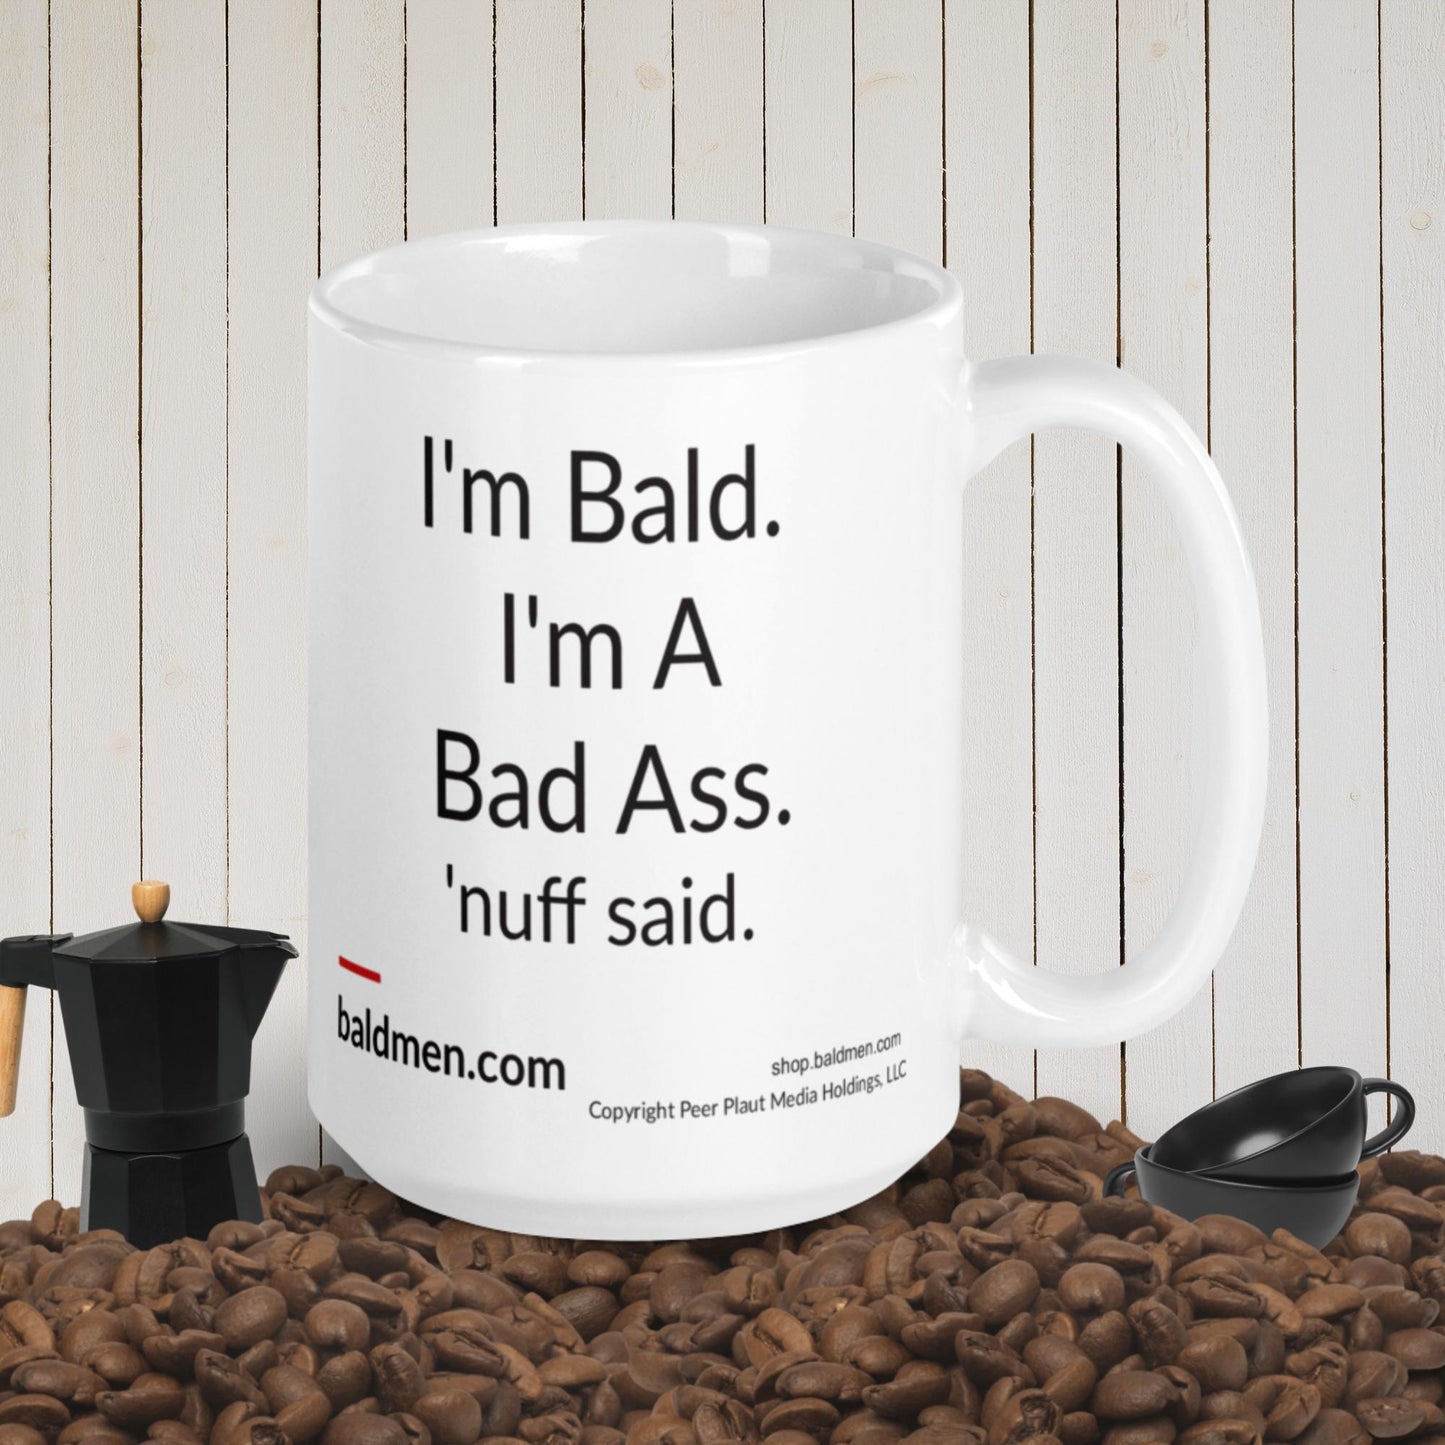 Celebrate your badassery with our I'm a Bad Ass Coffee Mug.